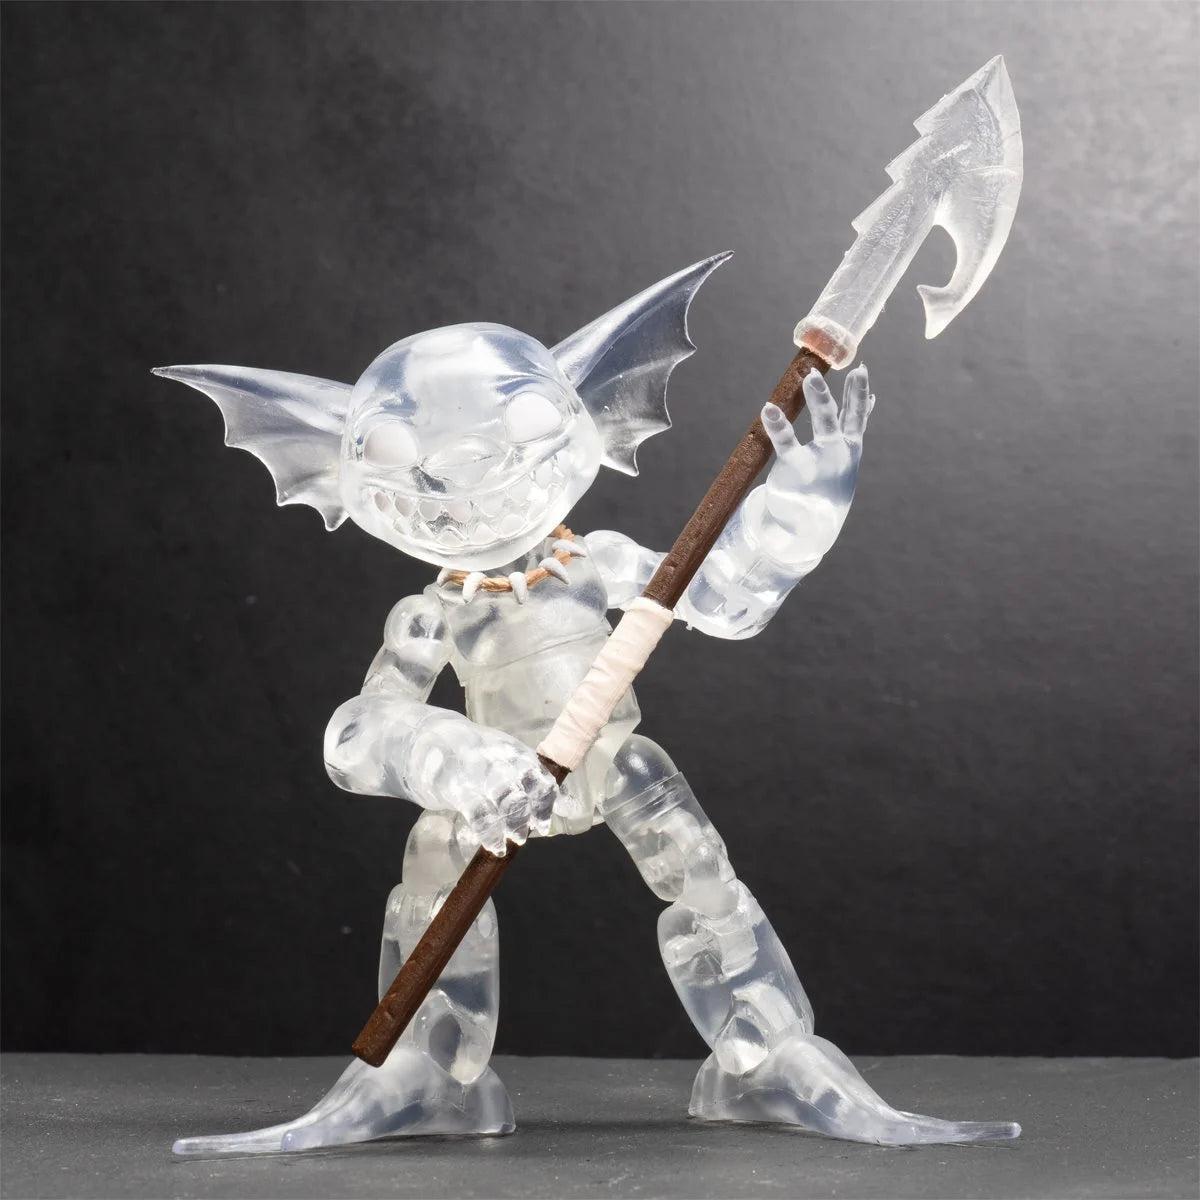 Plunderlings Drench Arctic Clear Variant 1:12 Scale Action Figure | SDCC Convention Exclusive